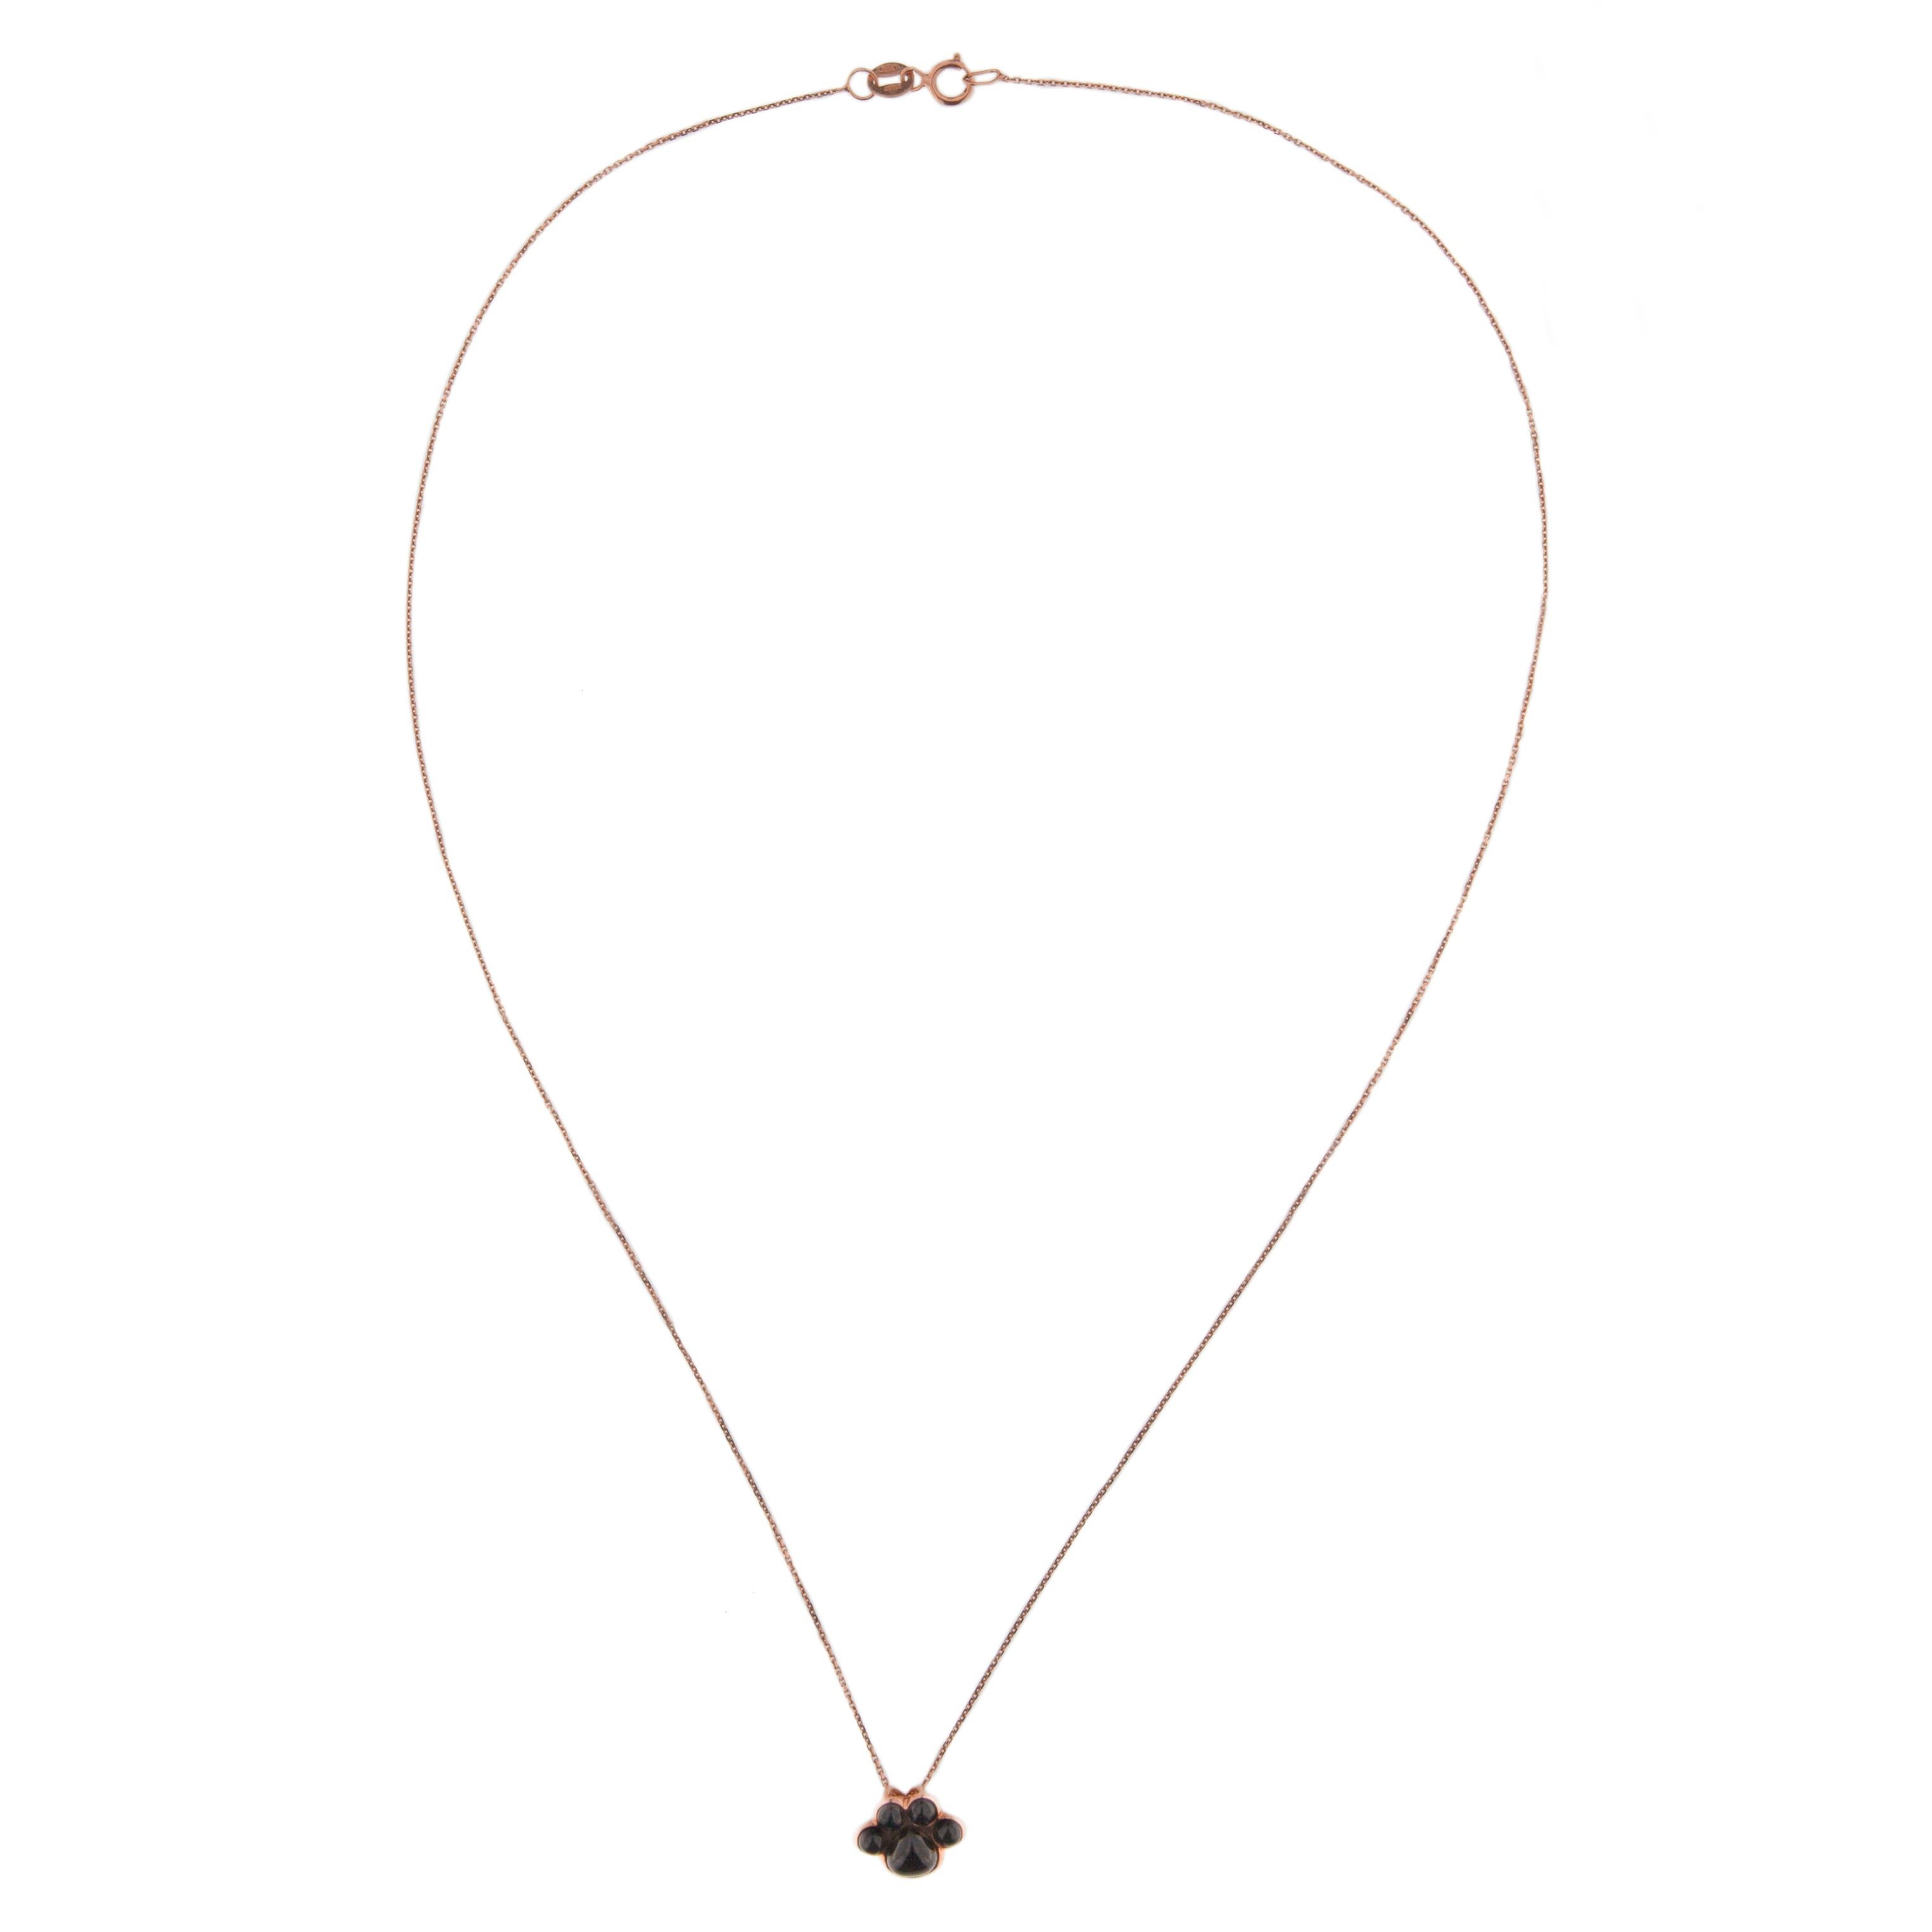 Jona design collection, hand crafted in Italy, 18 Karat rose gold paw print pendant necklace.
Dimensions :
- pendant : W 0.44 in/ 11,18 mm X  H 0.36 in/ 9,14 mm X D 0.27 in/ 6,86 mm
- chain : Lenght 18 in/ 45 cm
All Jona jewelry is new and has never